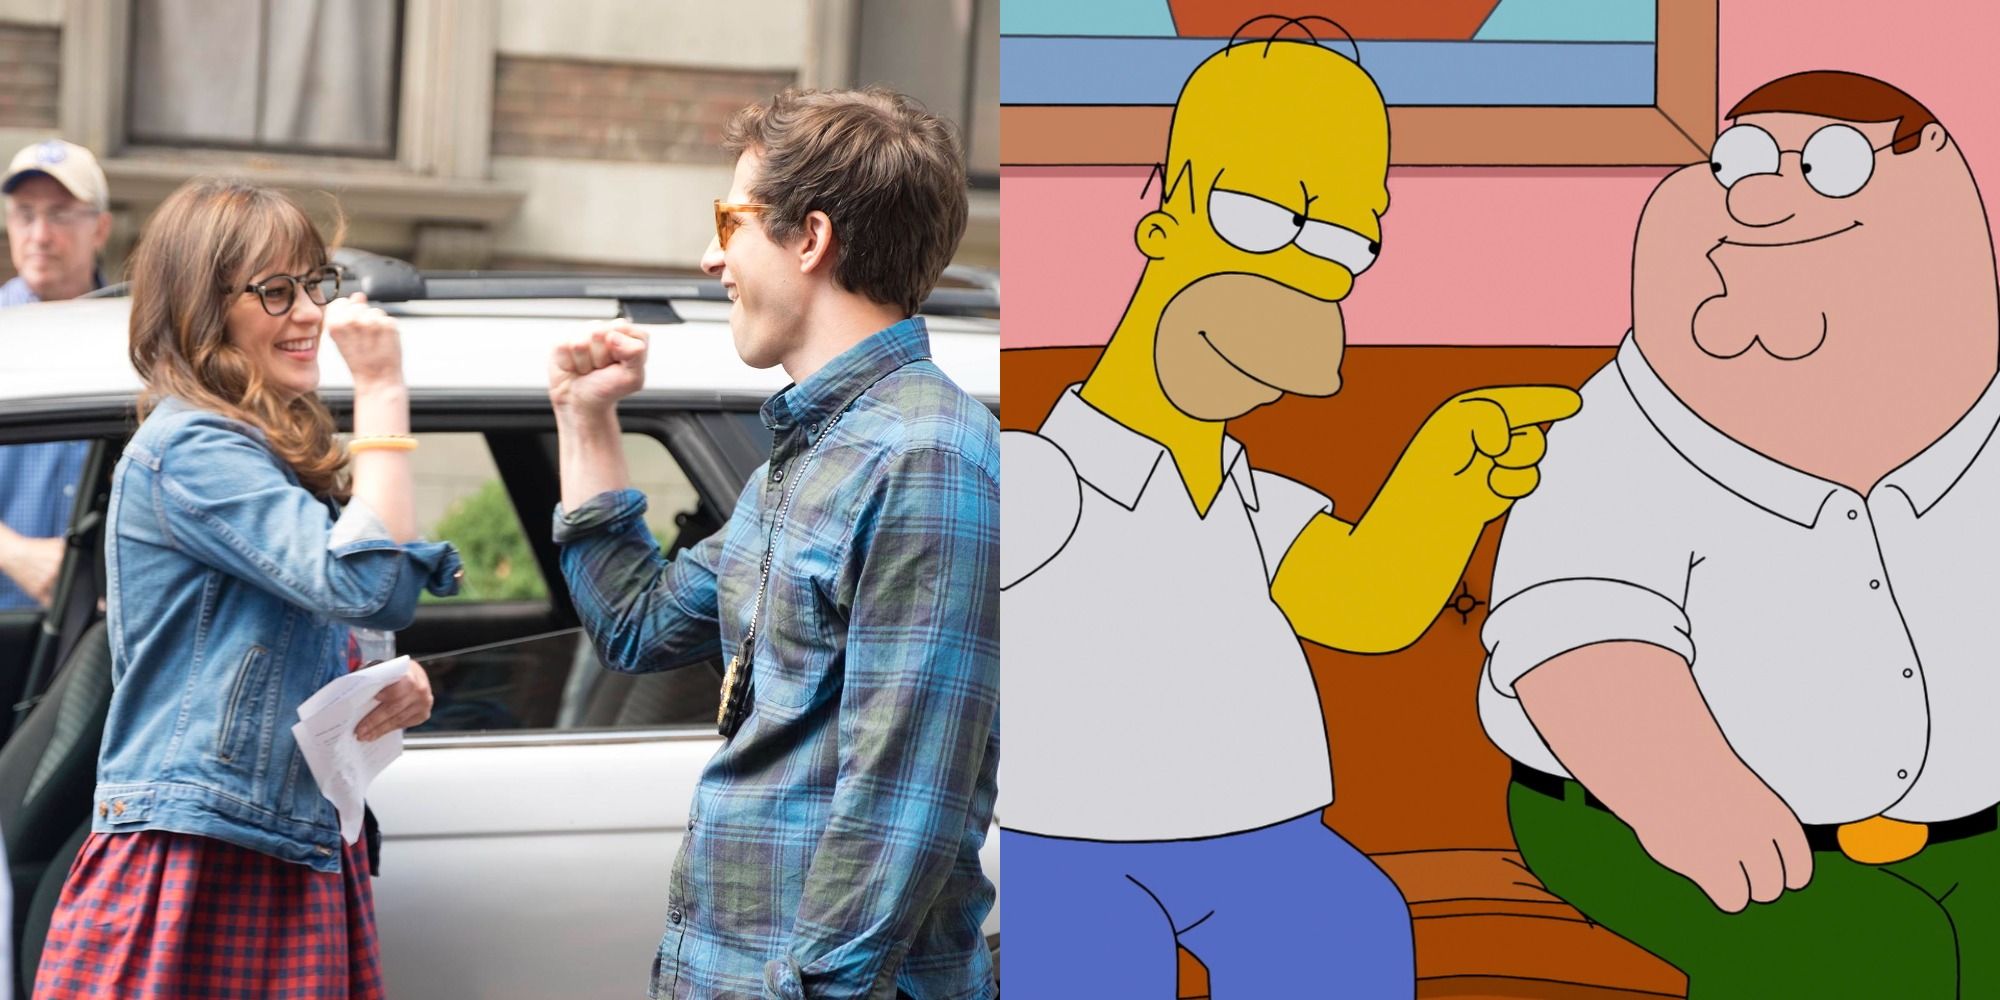 Split image of New Girl crossover with Brooklyn 99 and The Simpsons crossover with Family Guy